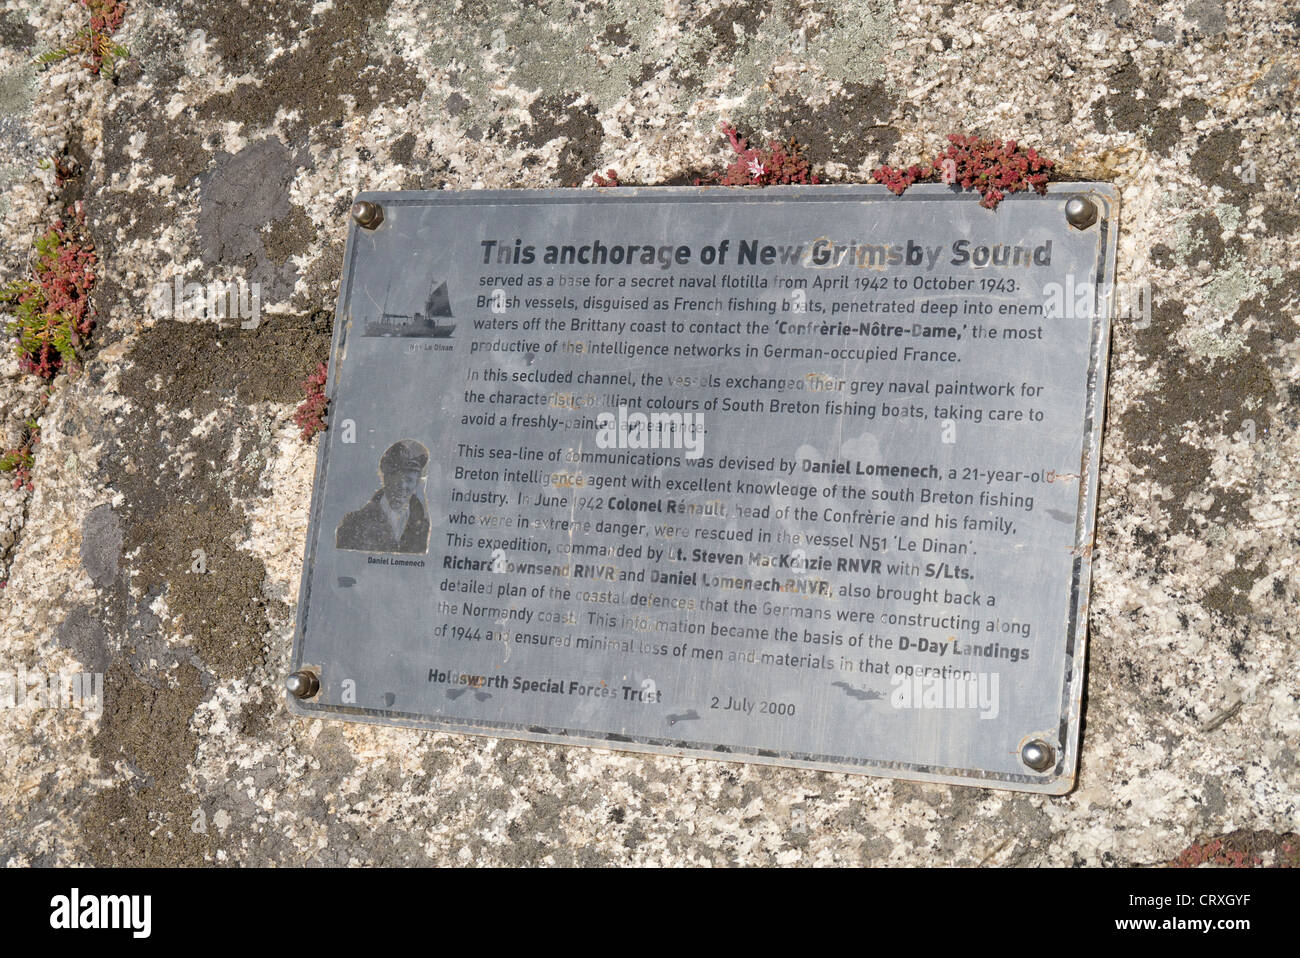 Plaque commemorating the secret Naval flotillas that sailed from Tresco, Isles of Scilly to Nazi-occupied Brittany in WW2. Stock Photo